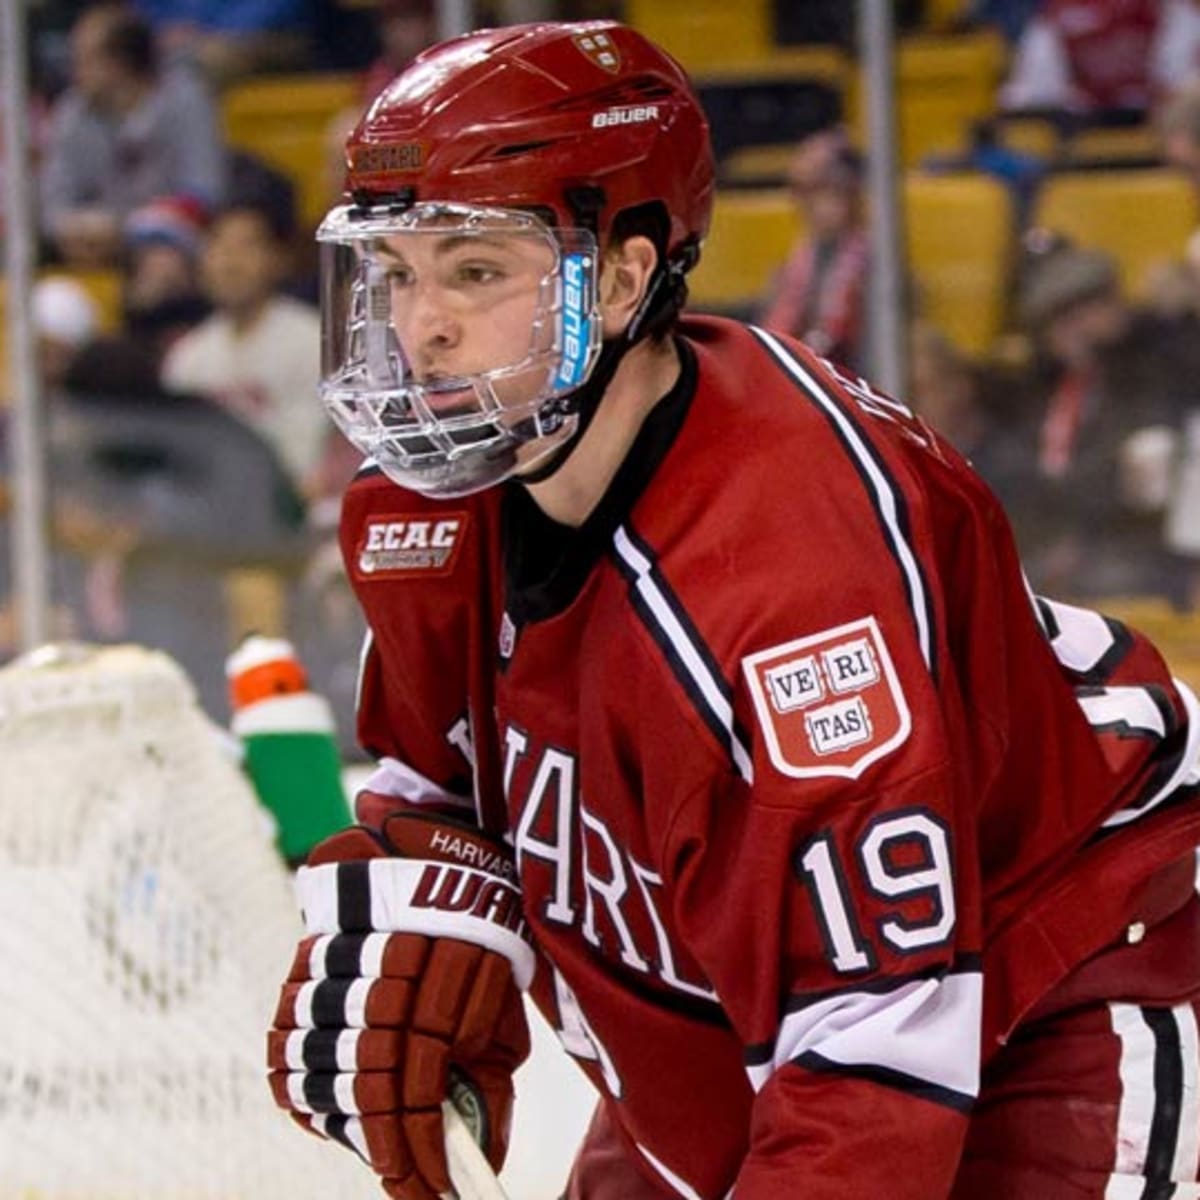 Jimmy Vesey, the NCAA Loophole, and the New Jersey Devils - All